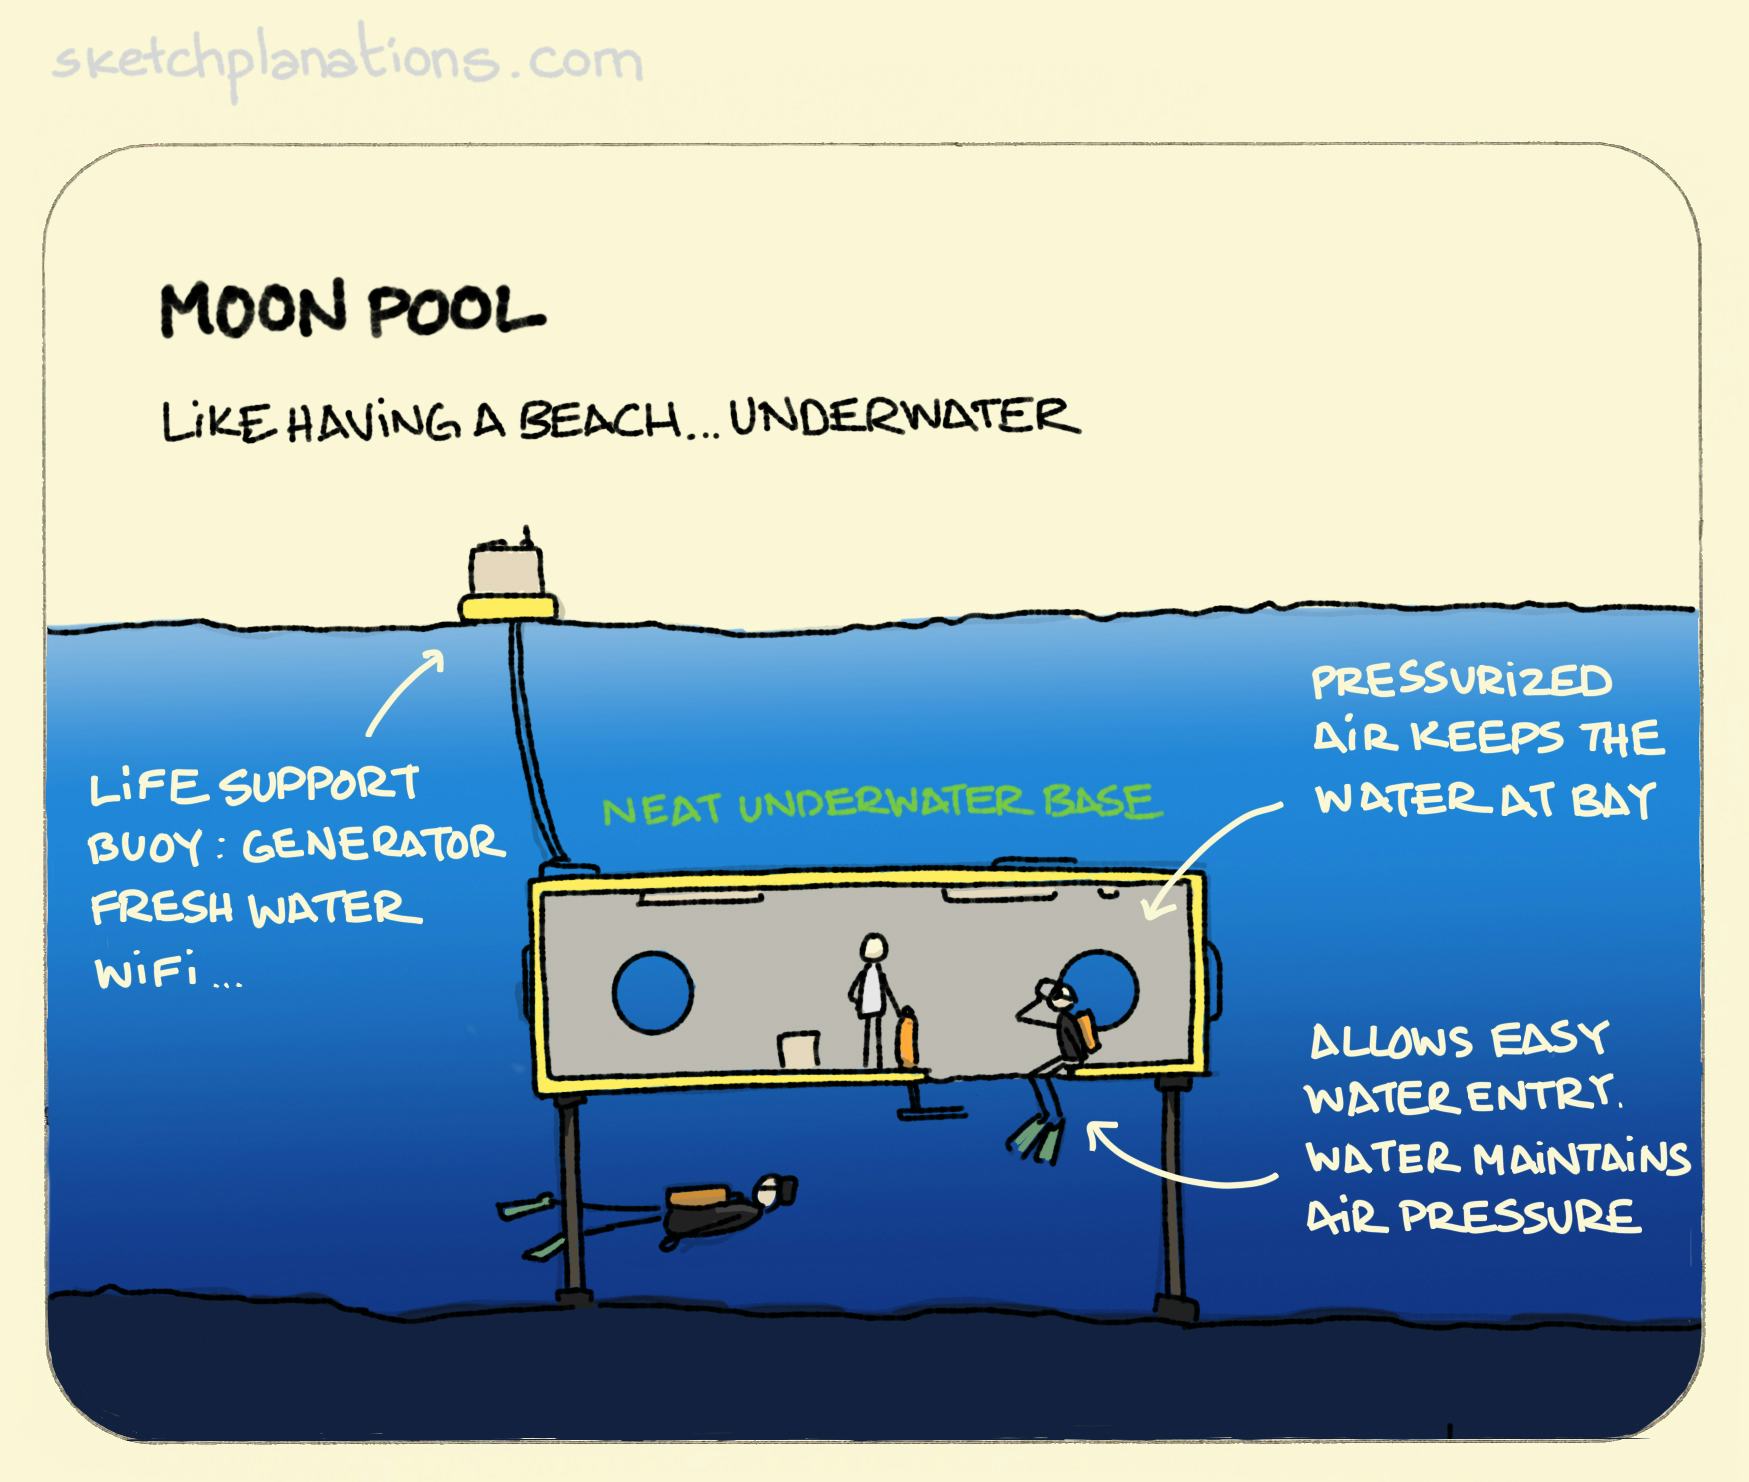 Moon pool illustration: a moon pool as a neat underwater base showing divers entering the water, underwater, like it was a pool